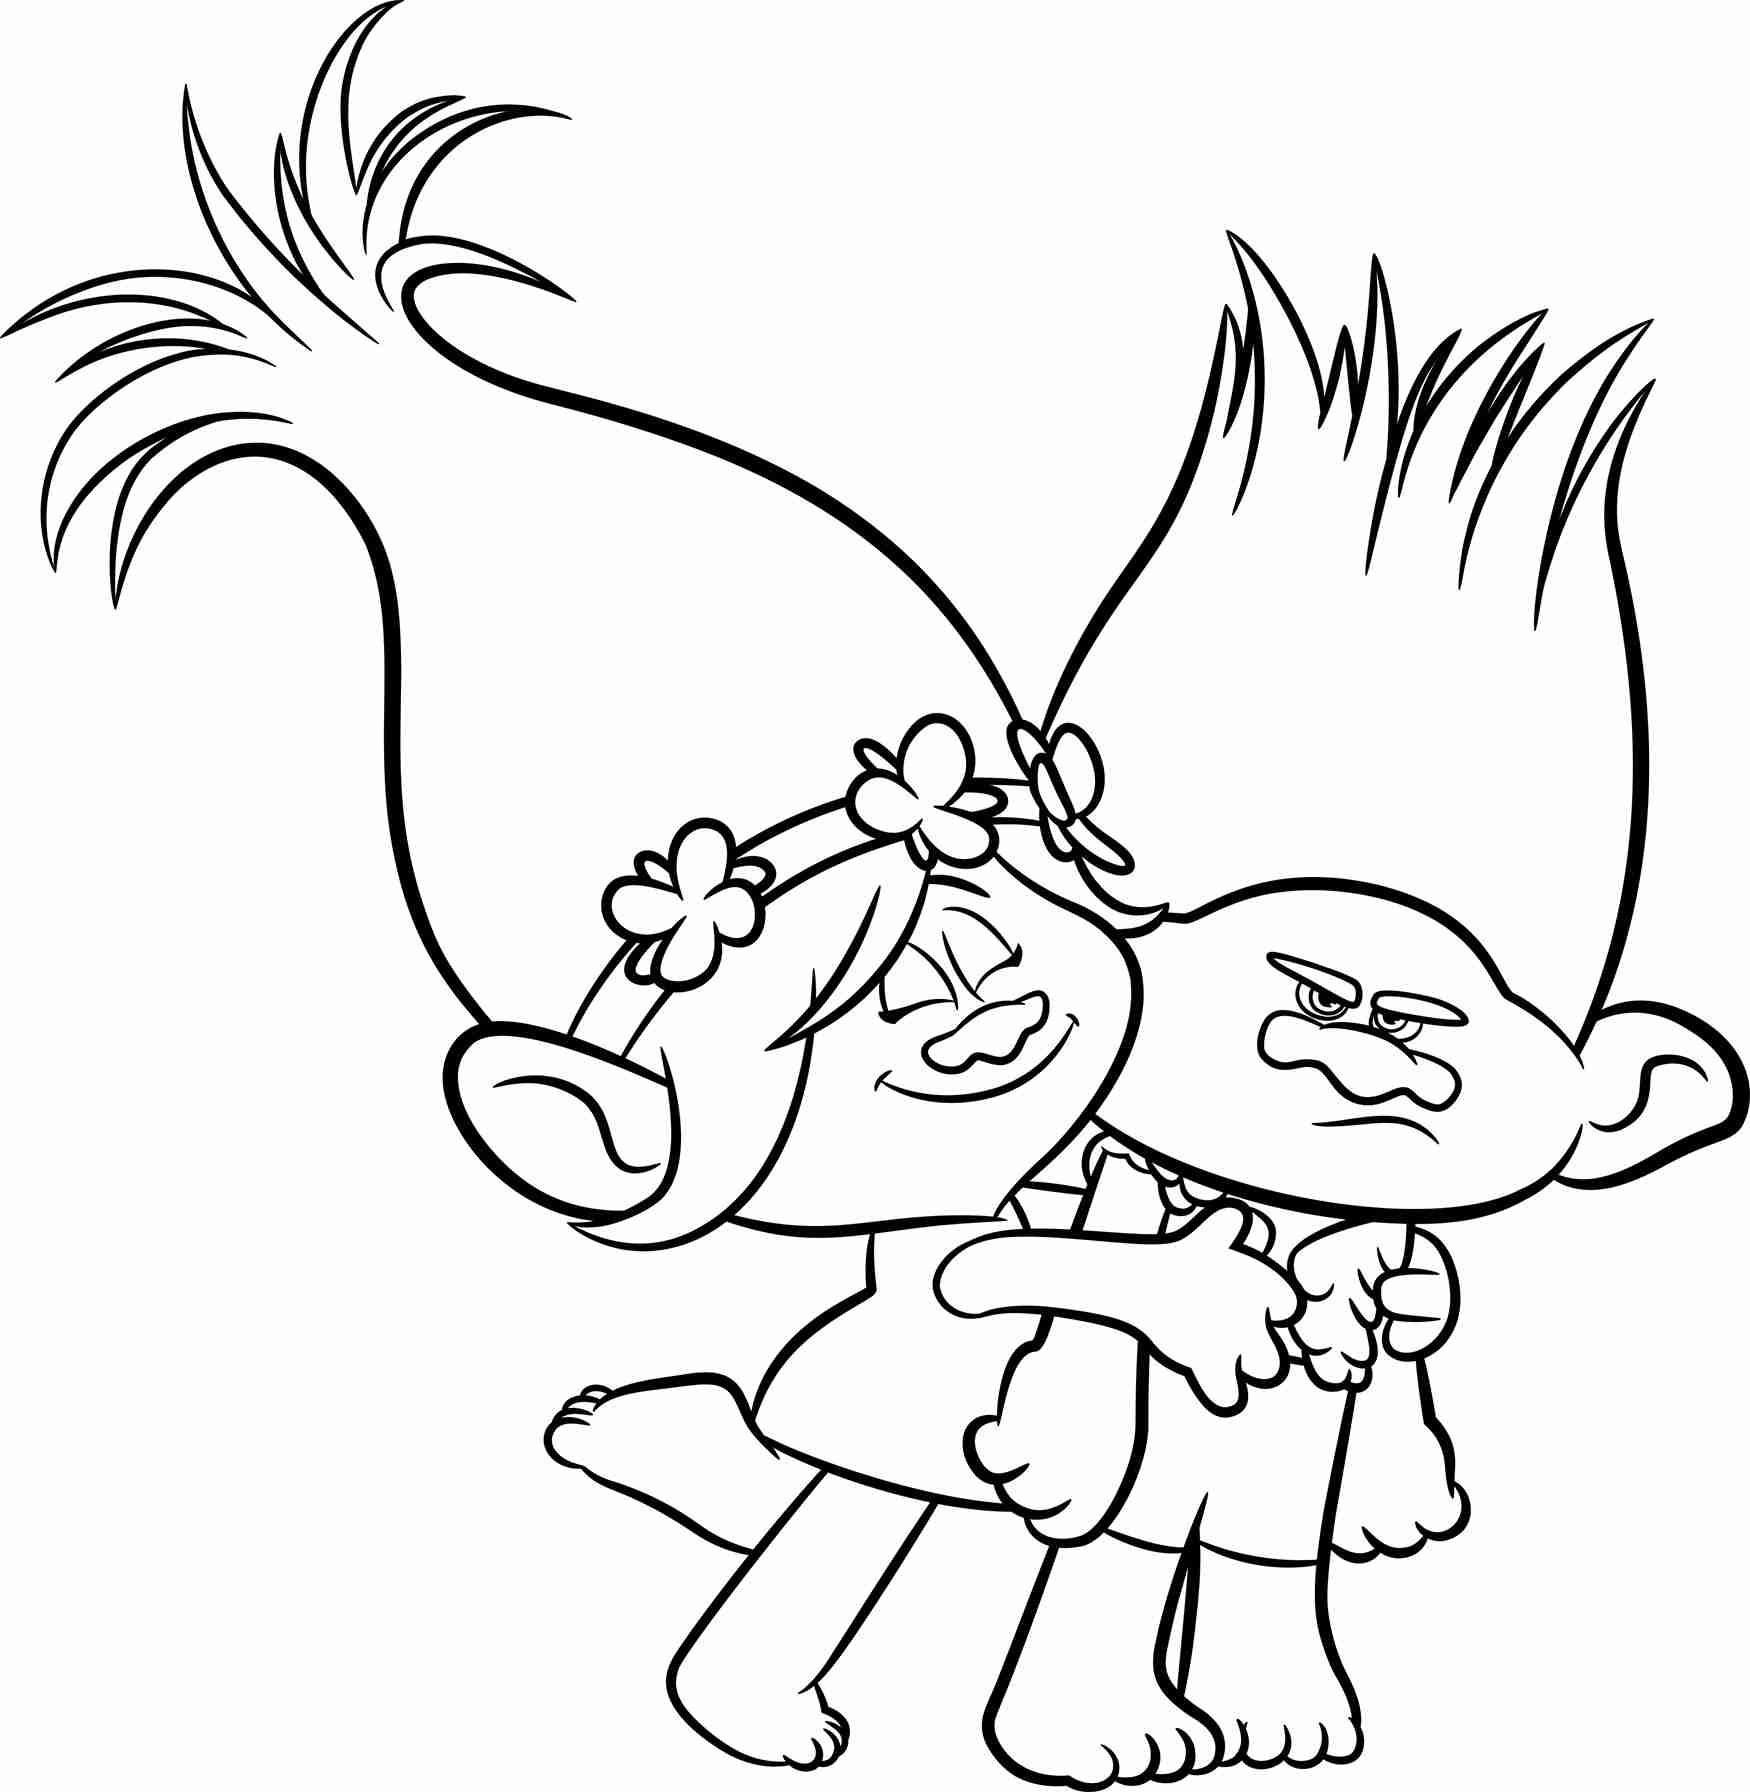 Coloring pages coloring book free trolls pages online